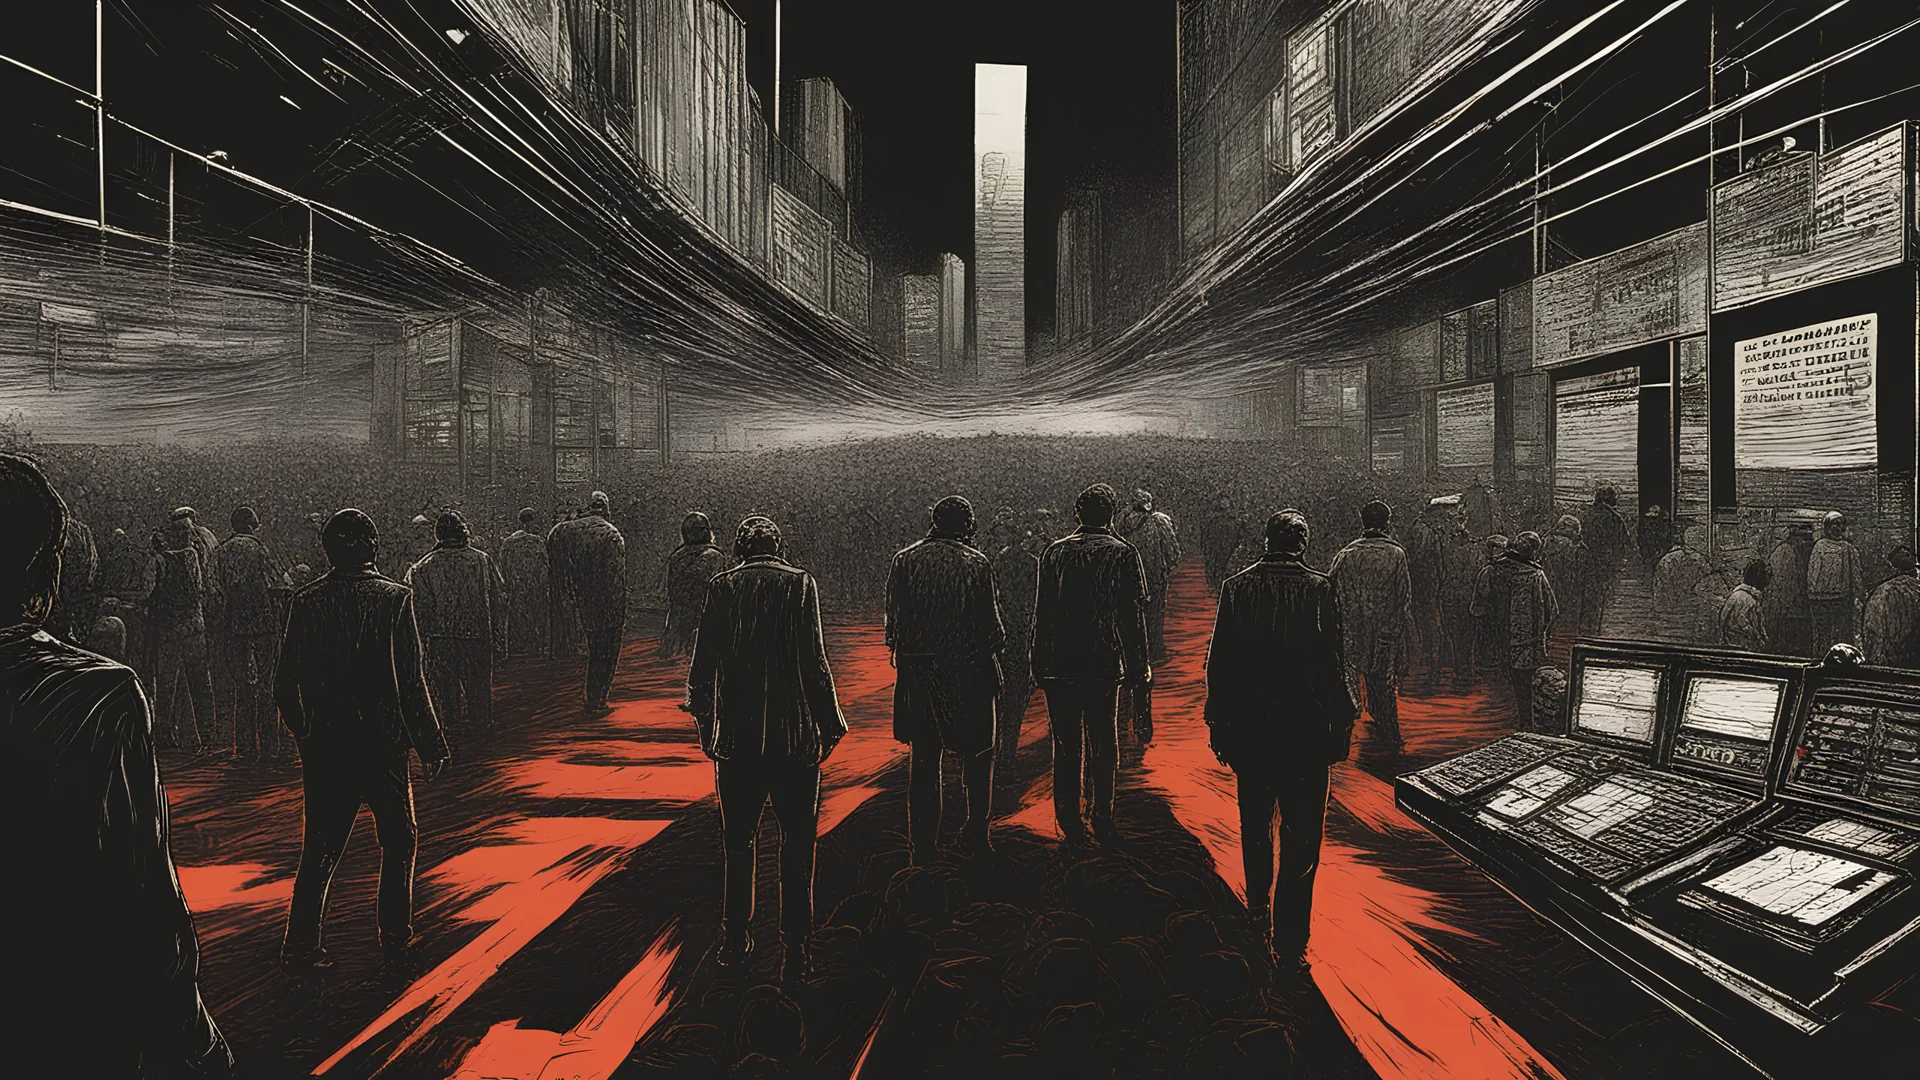 a digital artwork depicting the frustrations and power dynamics in a hostile, cutthroat environment, underhanded attacks, corruption, vulnerability, crossing paths, fiat currency, dystopian society, political thriller, dark and gritty, conspiracy theories, illustrative style, high contrast, intense atmosphere, digital manipulation, gritty texture